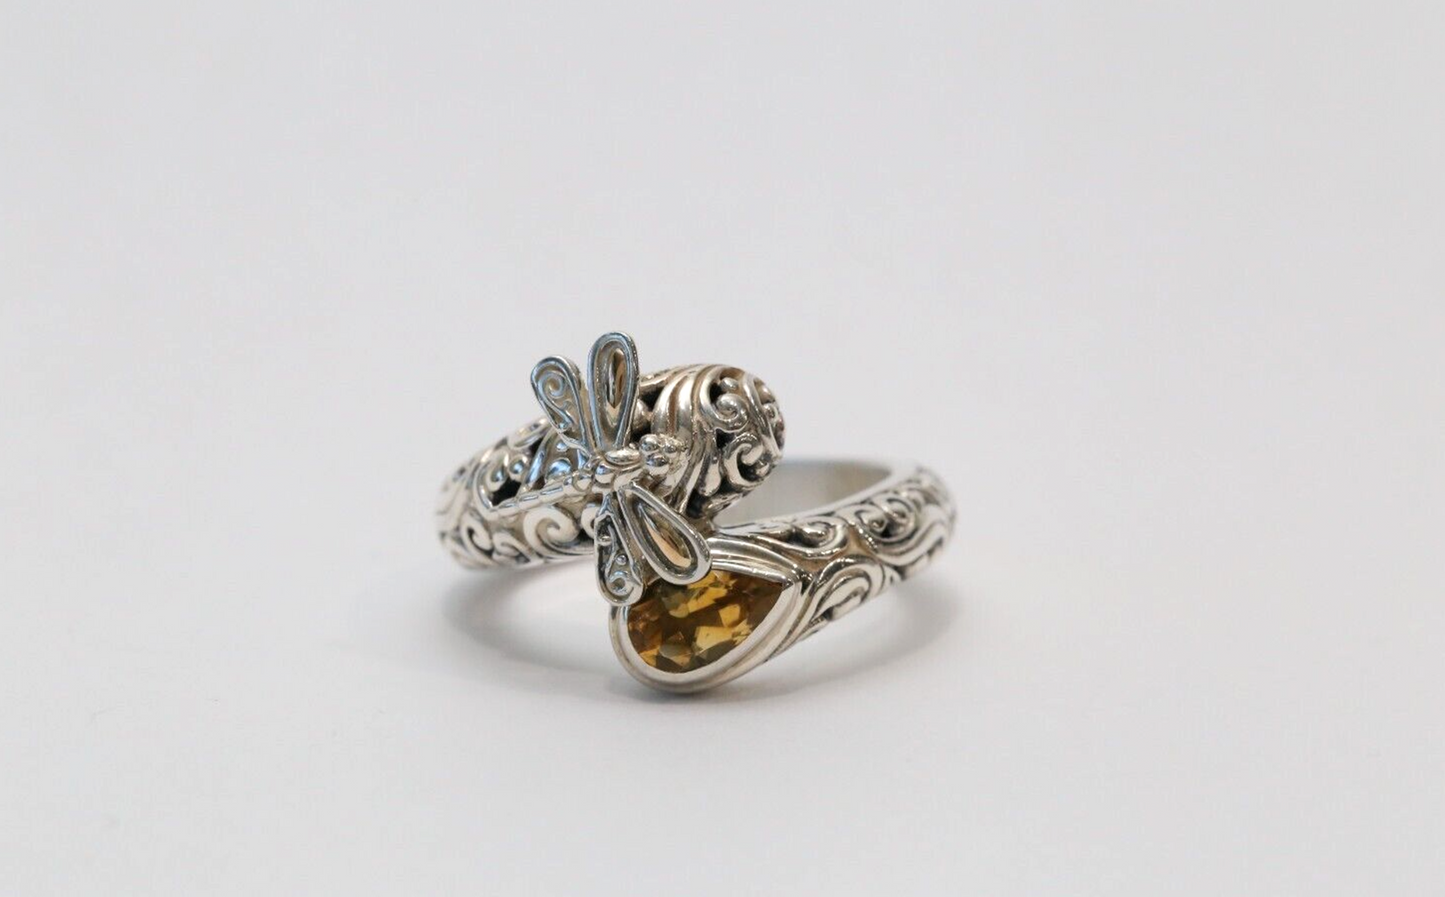 ID Sterling Silver Citrine Dragonfly Bypass Ring with 18k Gold Accents, Size 10 - 8.1g